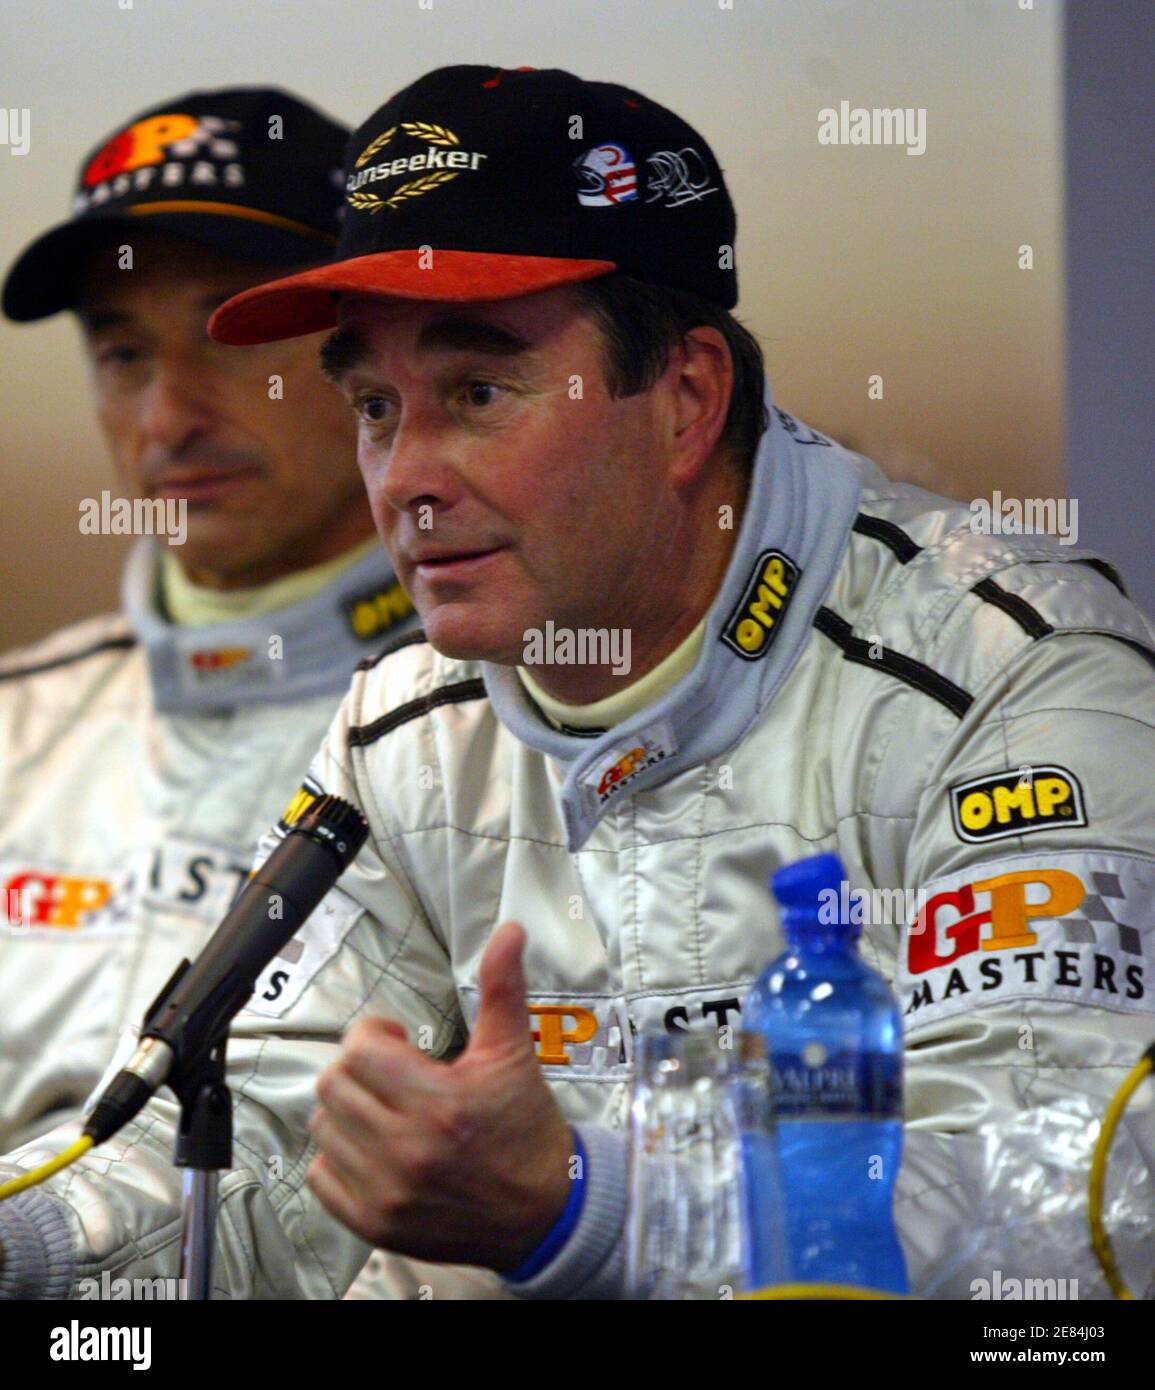 Britain's Nigel Mansell (R) speaks at the news conference at Kyalami circuit, near Johannesburg November 12, 2005. Mansell claimed pole position for the inaugural Grand Prix Masters race at the Kyalami circuit in Johannesburg on Saturday. REUTERS/Juda Ngwenya Stock Photo